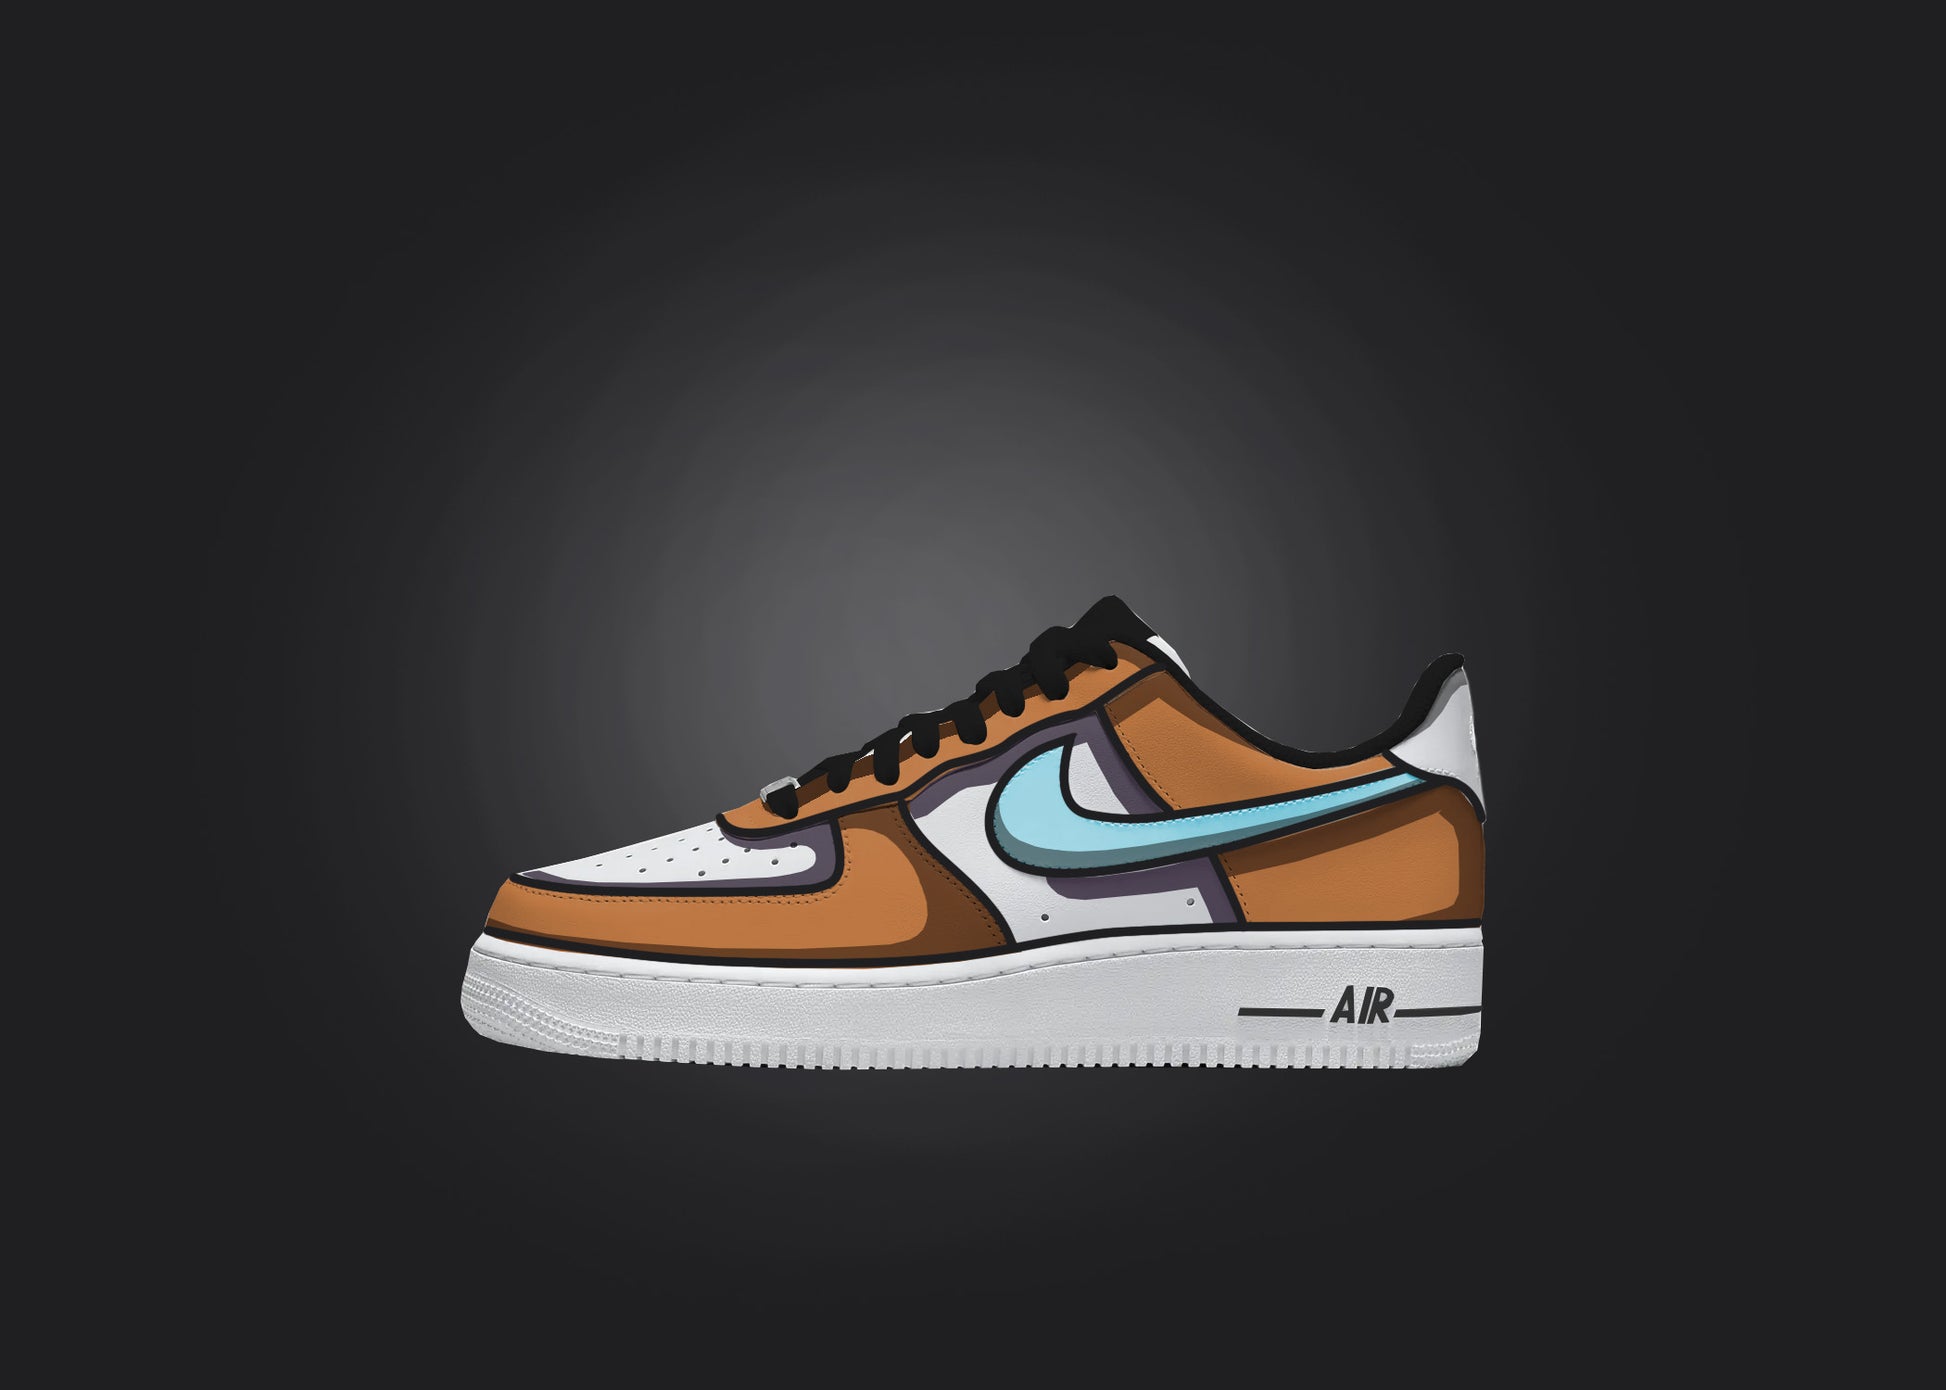 Single Custom Air Force 1 sneaker in orange and white, featured against a black background to showcase its unique cartoon shading.